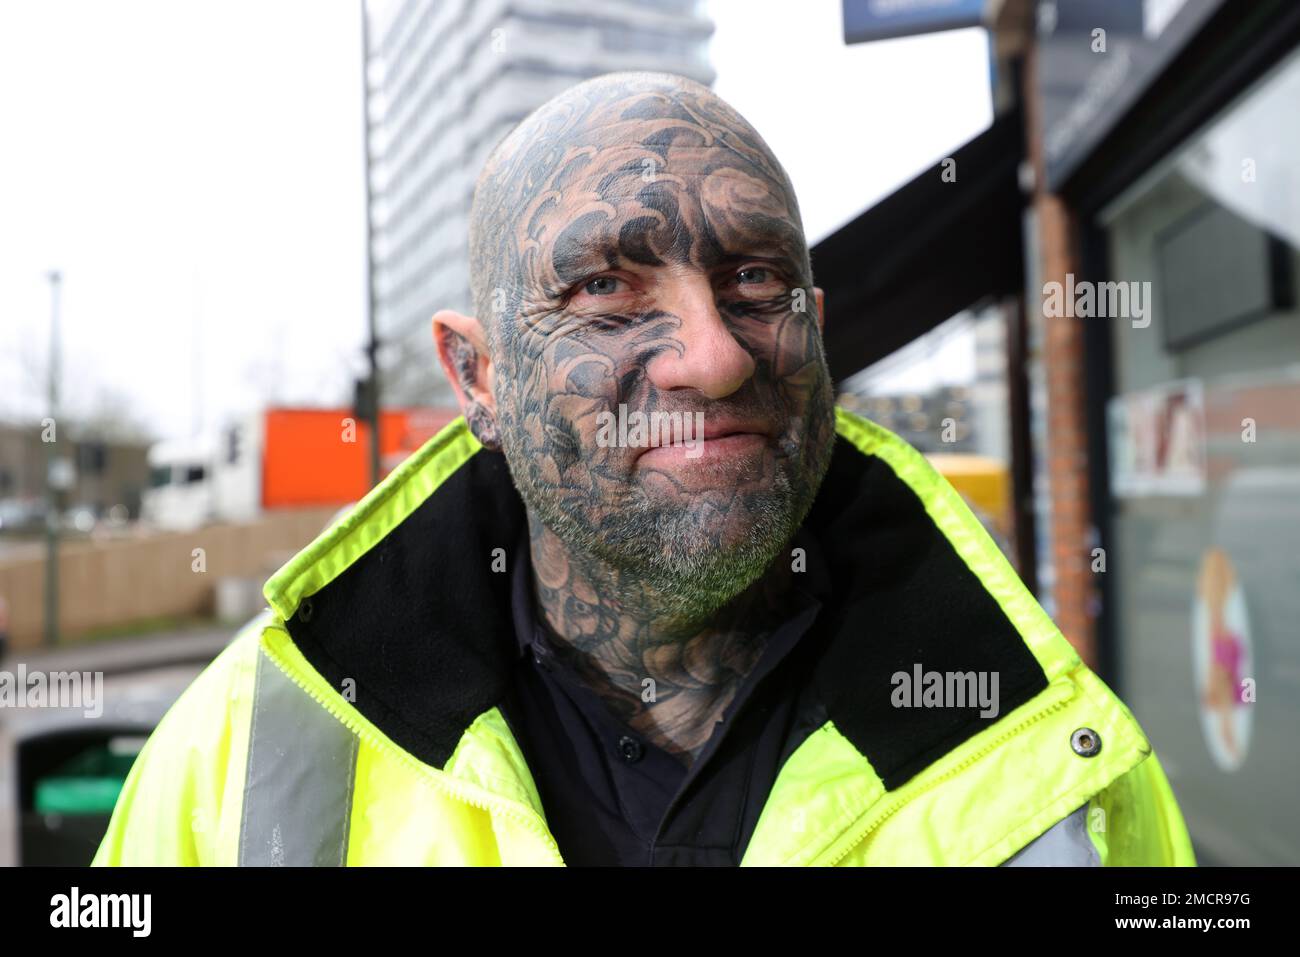 A man with full face tattoos pictured in Sunbury, London, UK. Stock Photo